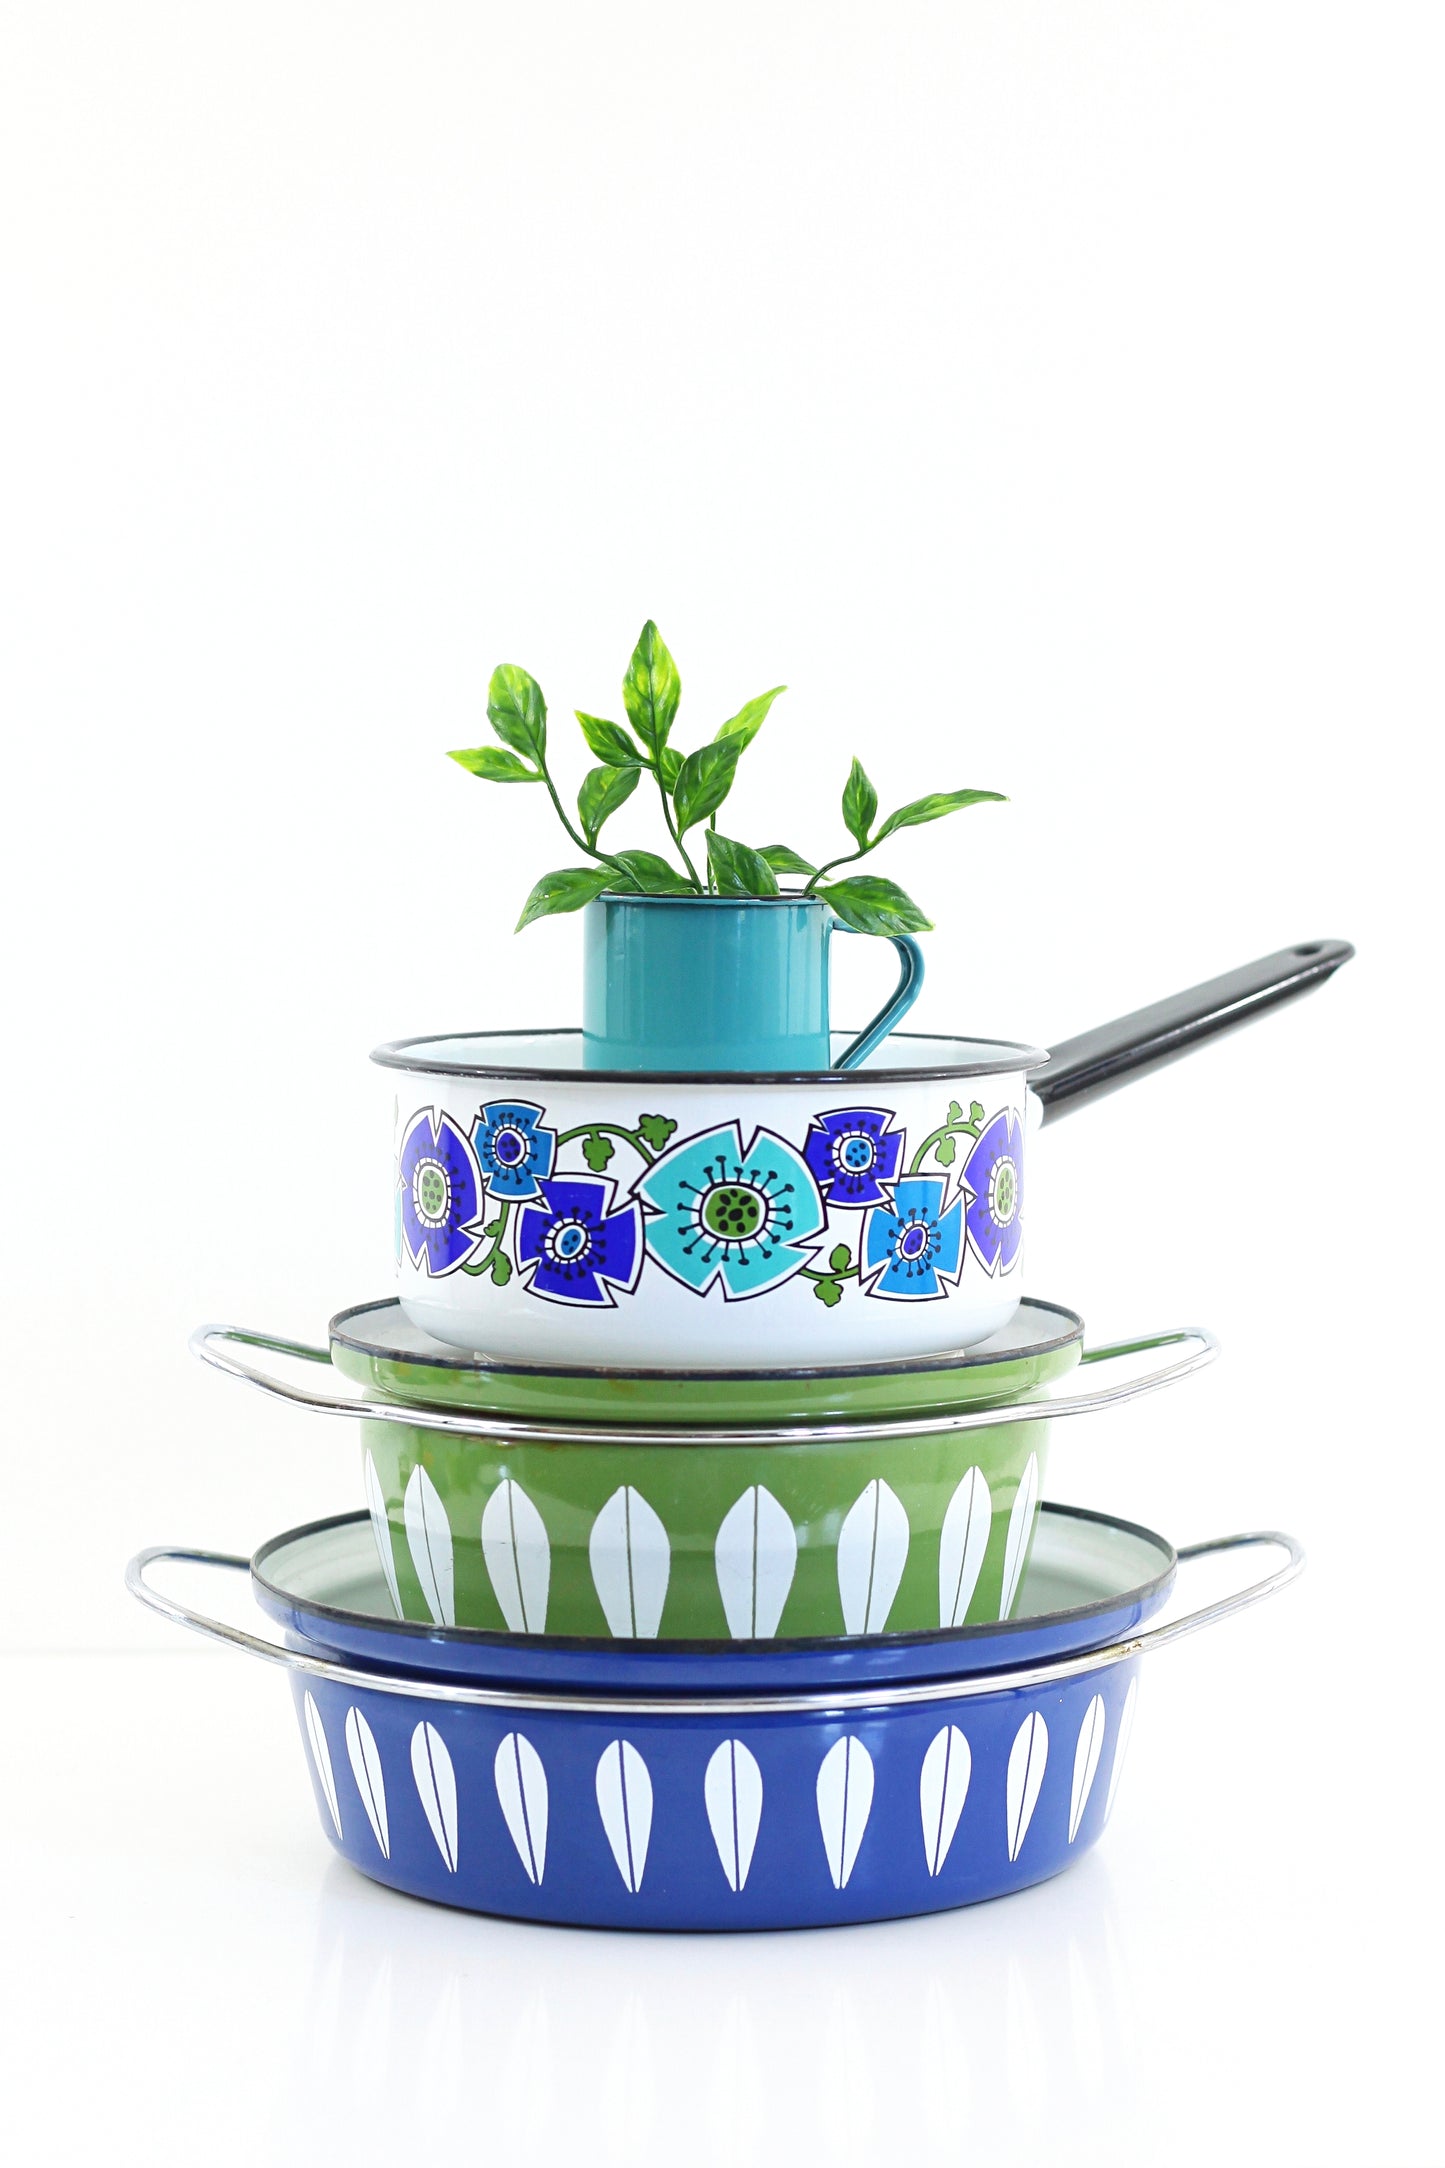 SOLD - Vintage Enamel Sauce Pan with Turquoise & Cobalt Flowers